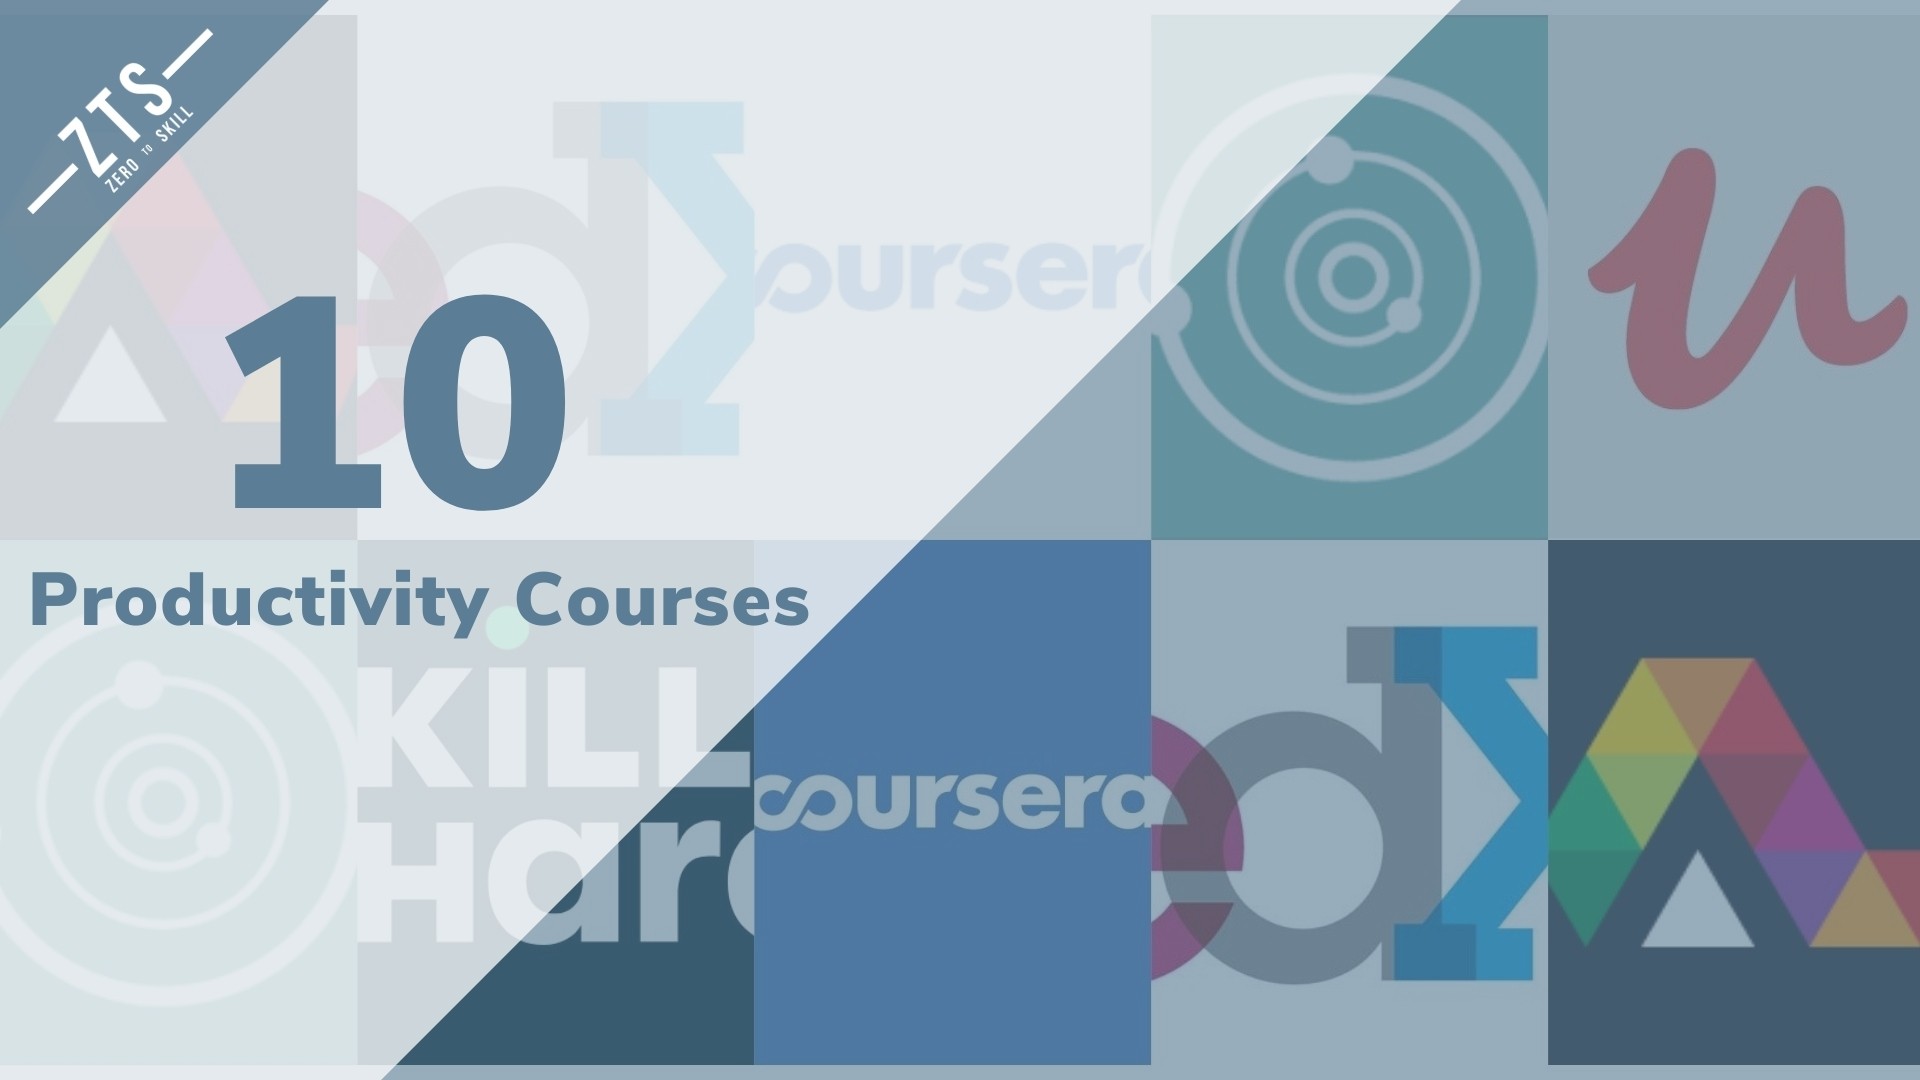 Top 10 Productivity Courses for 2020